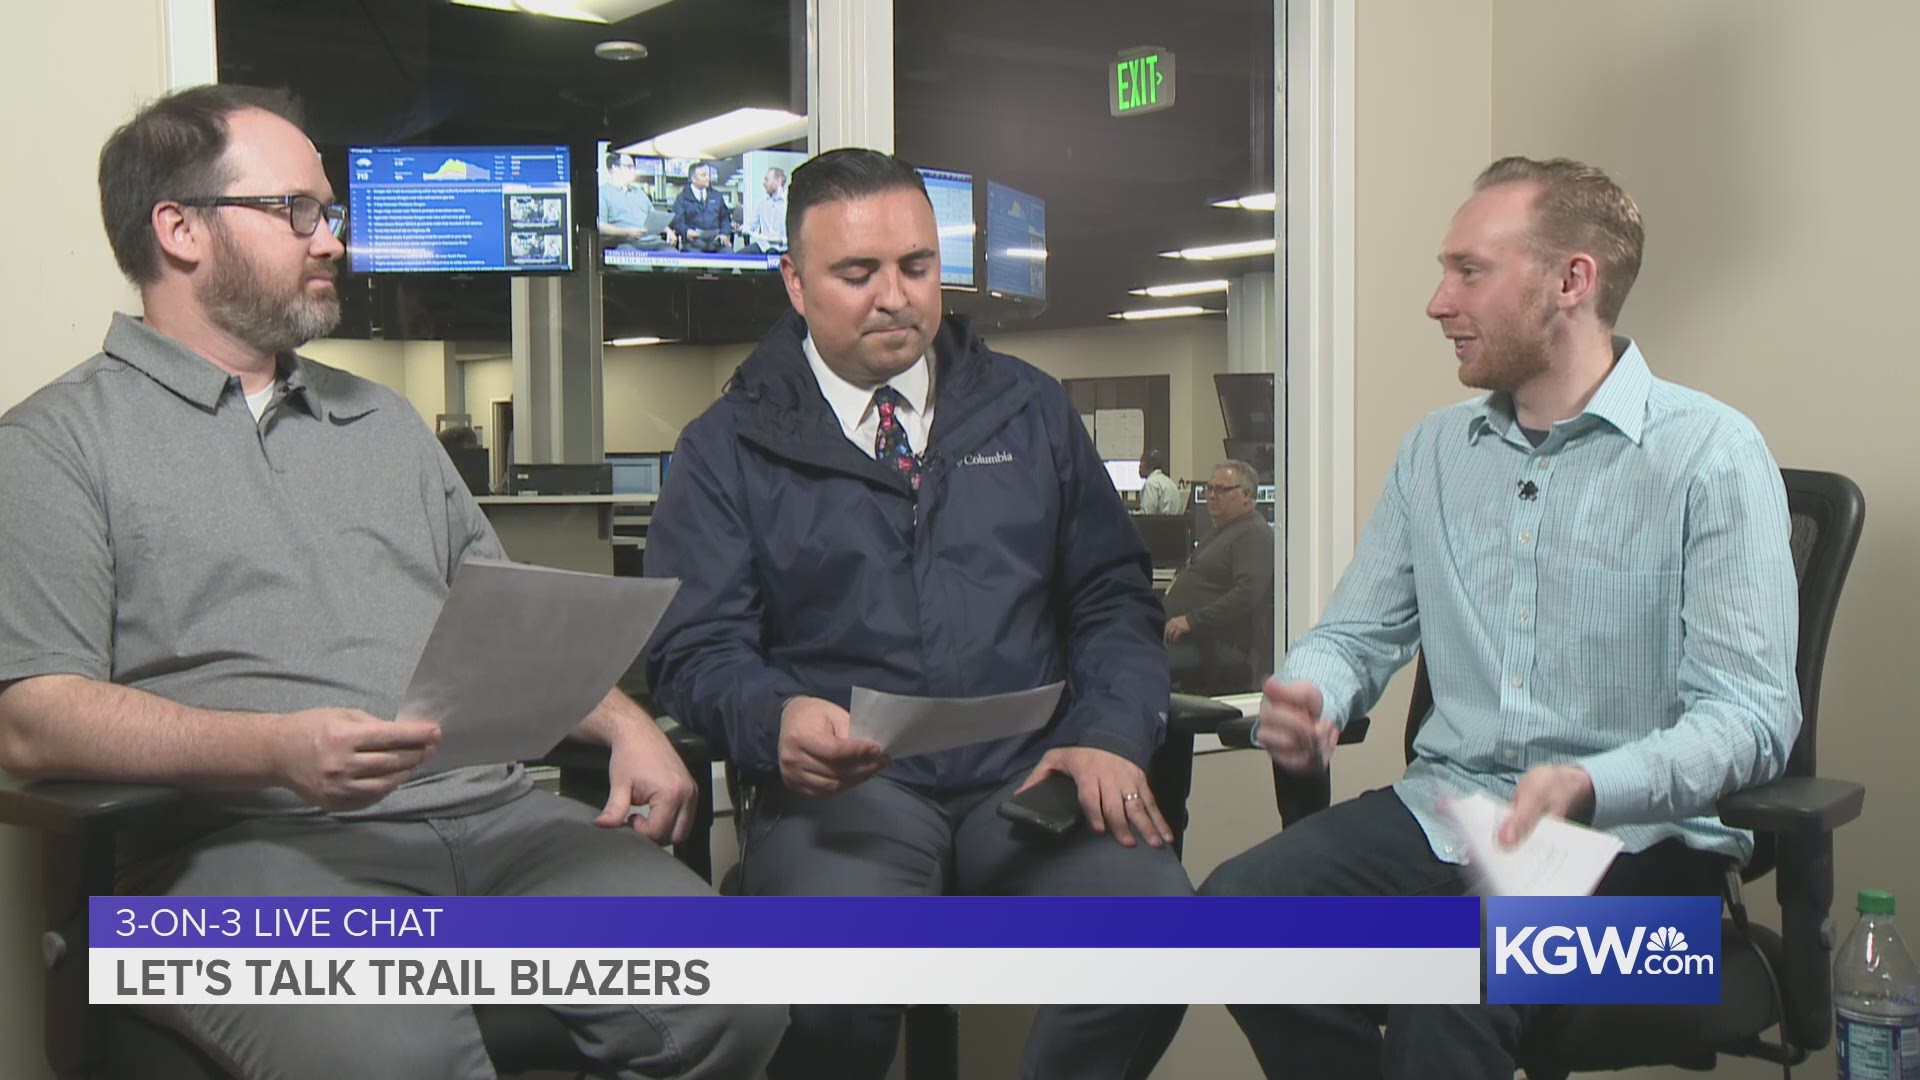 KGW's Jared Cowley, Orlando Sanchez and Nate Hanson talk about how far the Blazers' current record is from their expectations for the season.